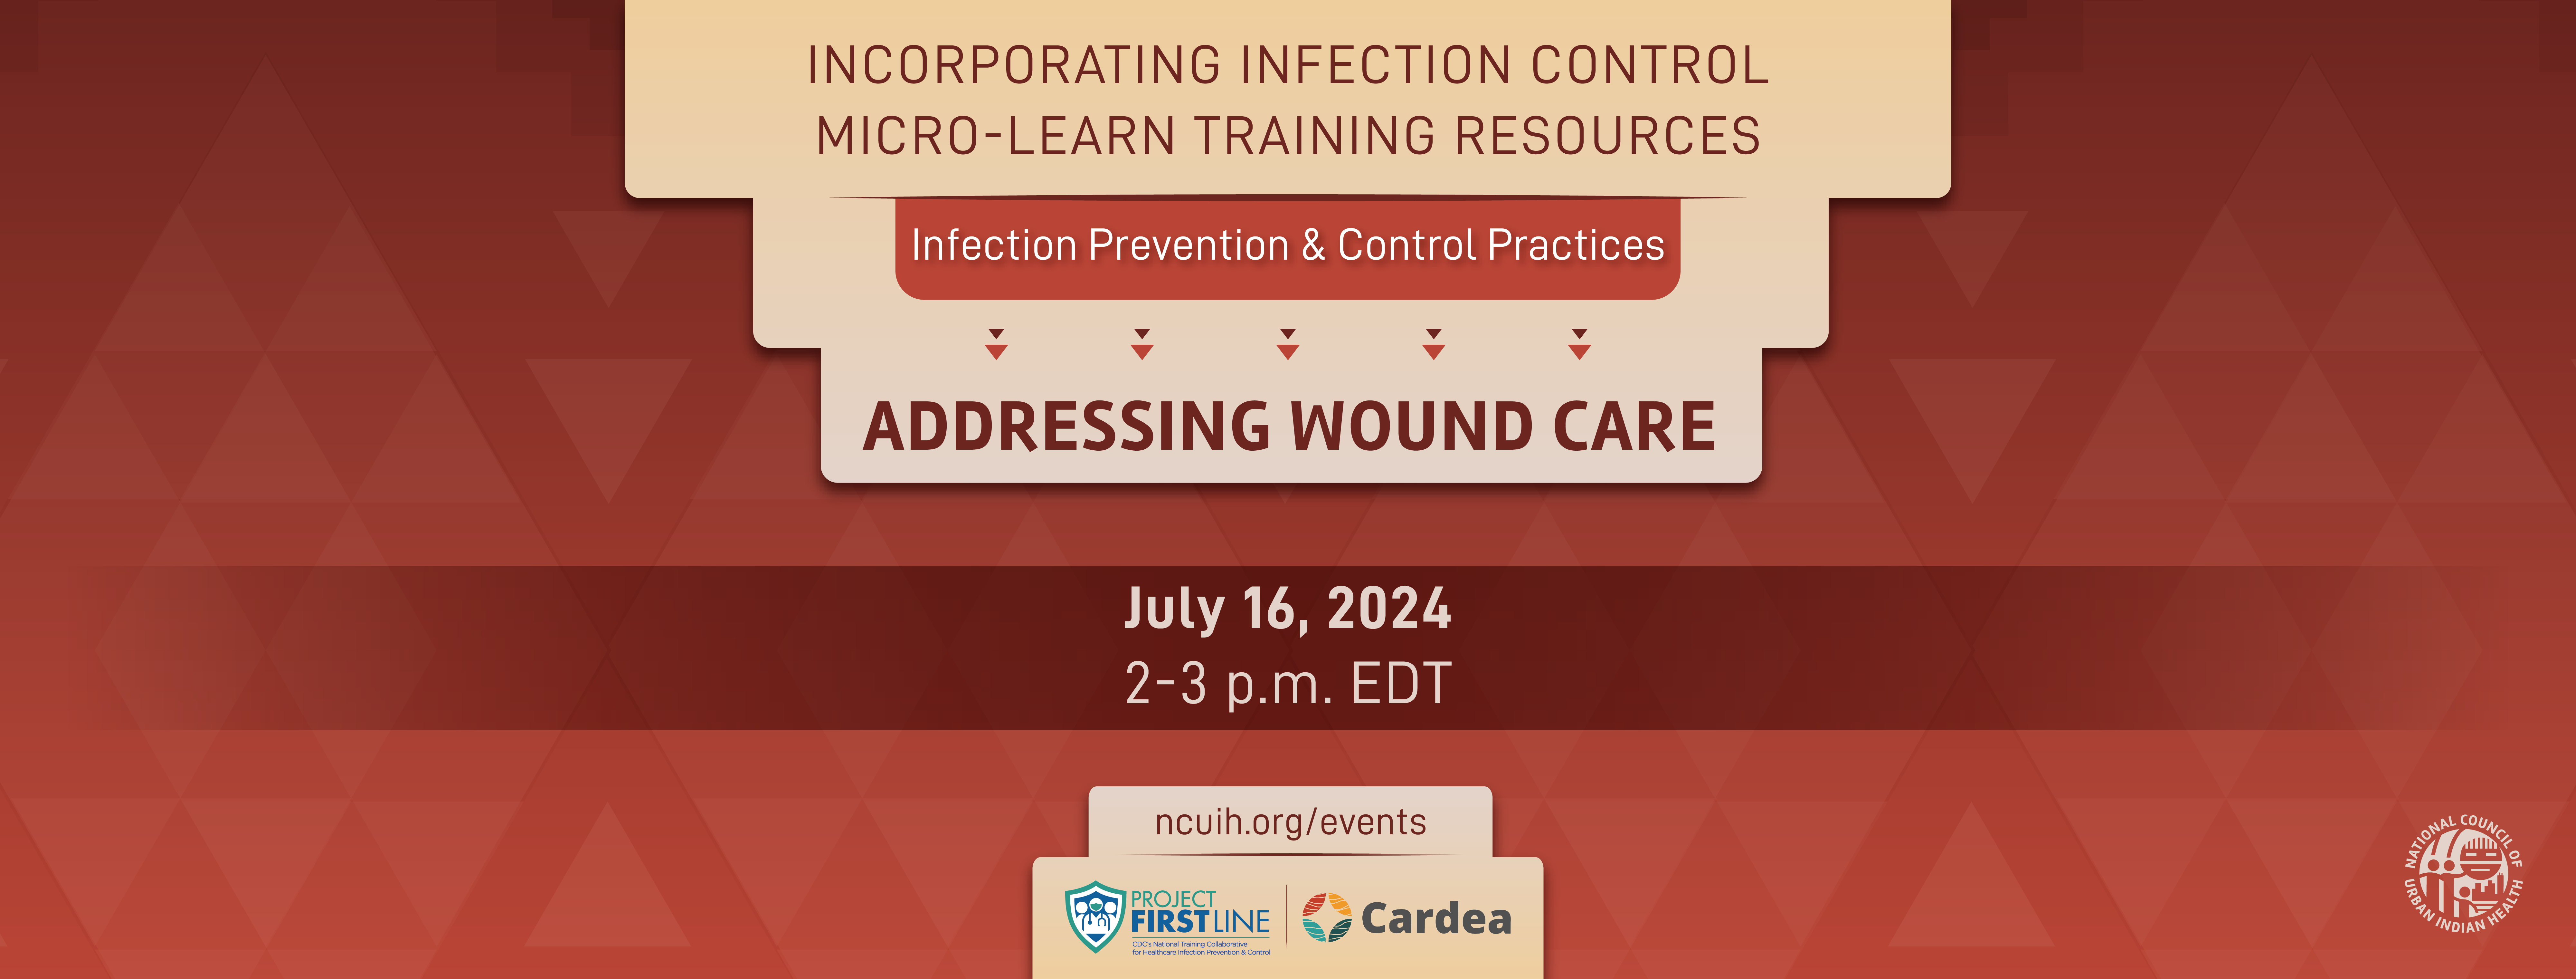 Infection Prevention & Control Practices: Addressing Wound Care